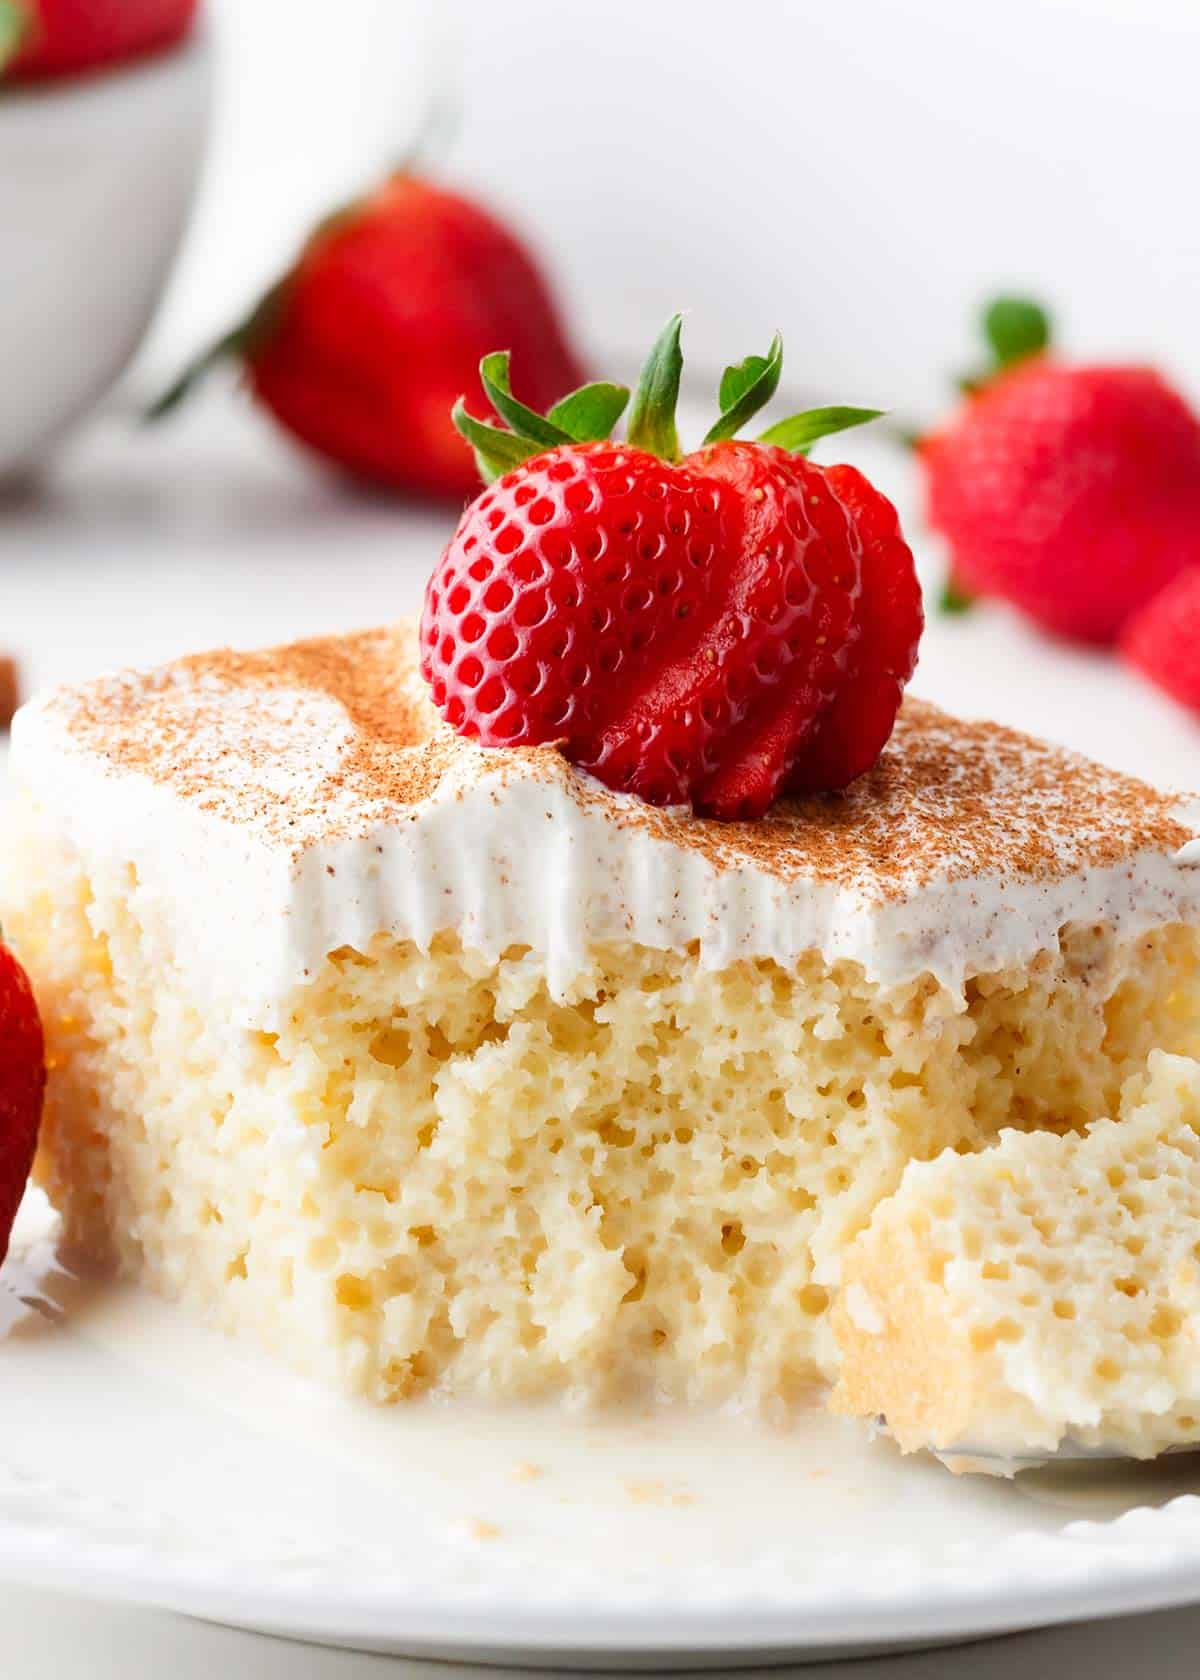 Slice of tres leches cake with strawberries on a white plate.